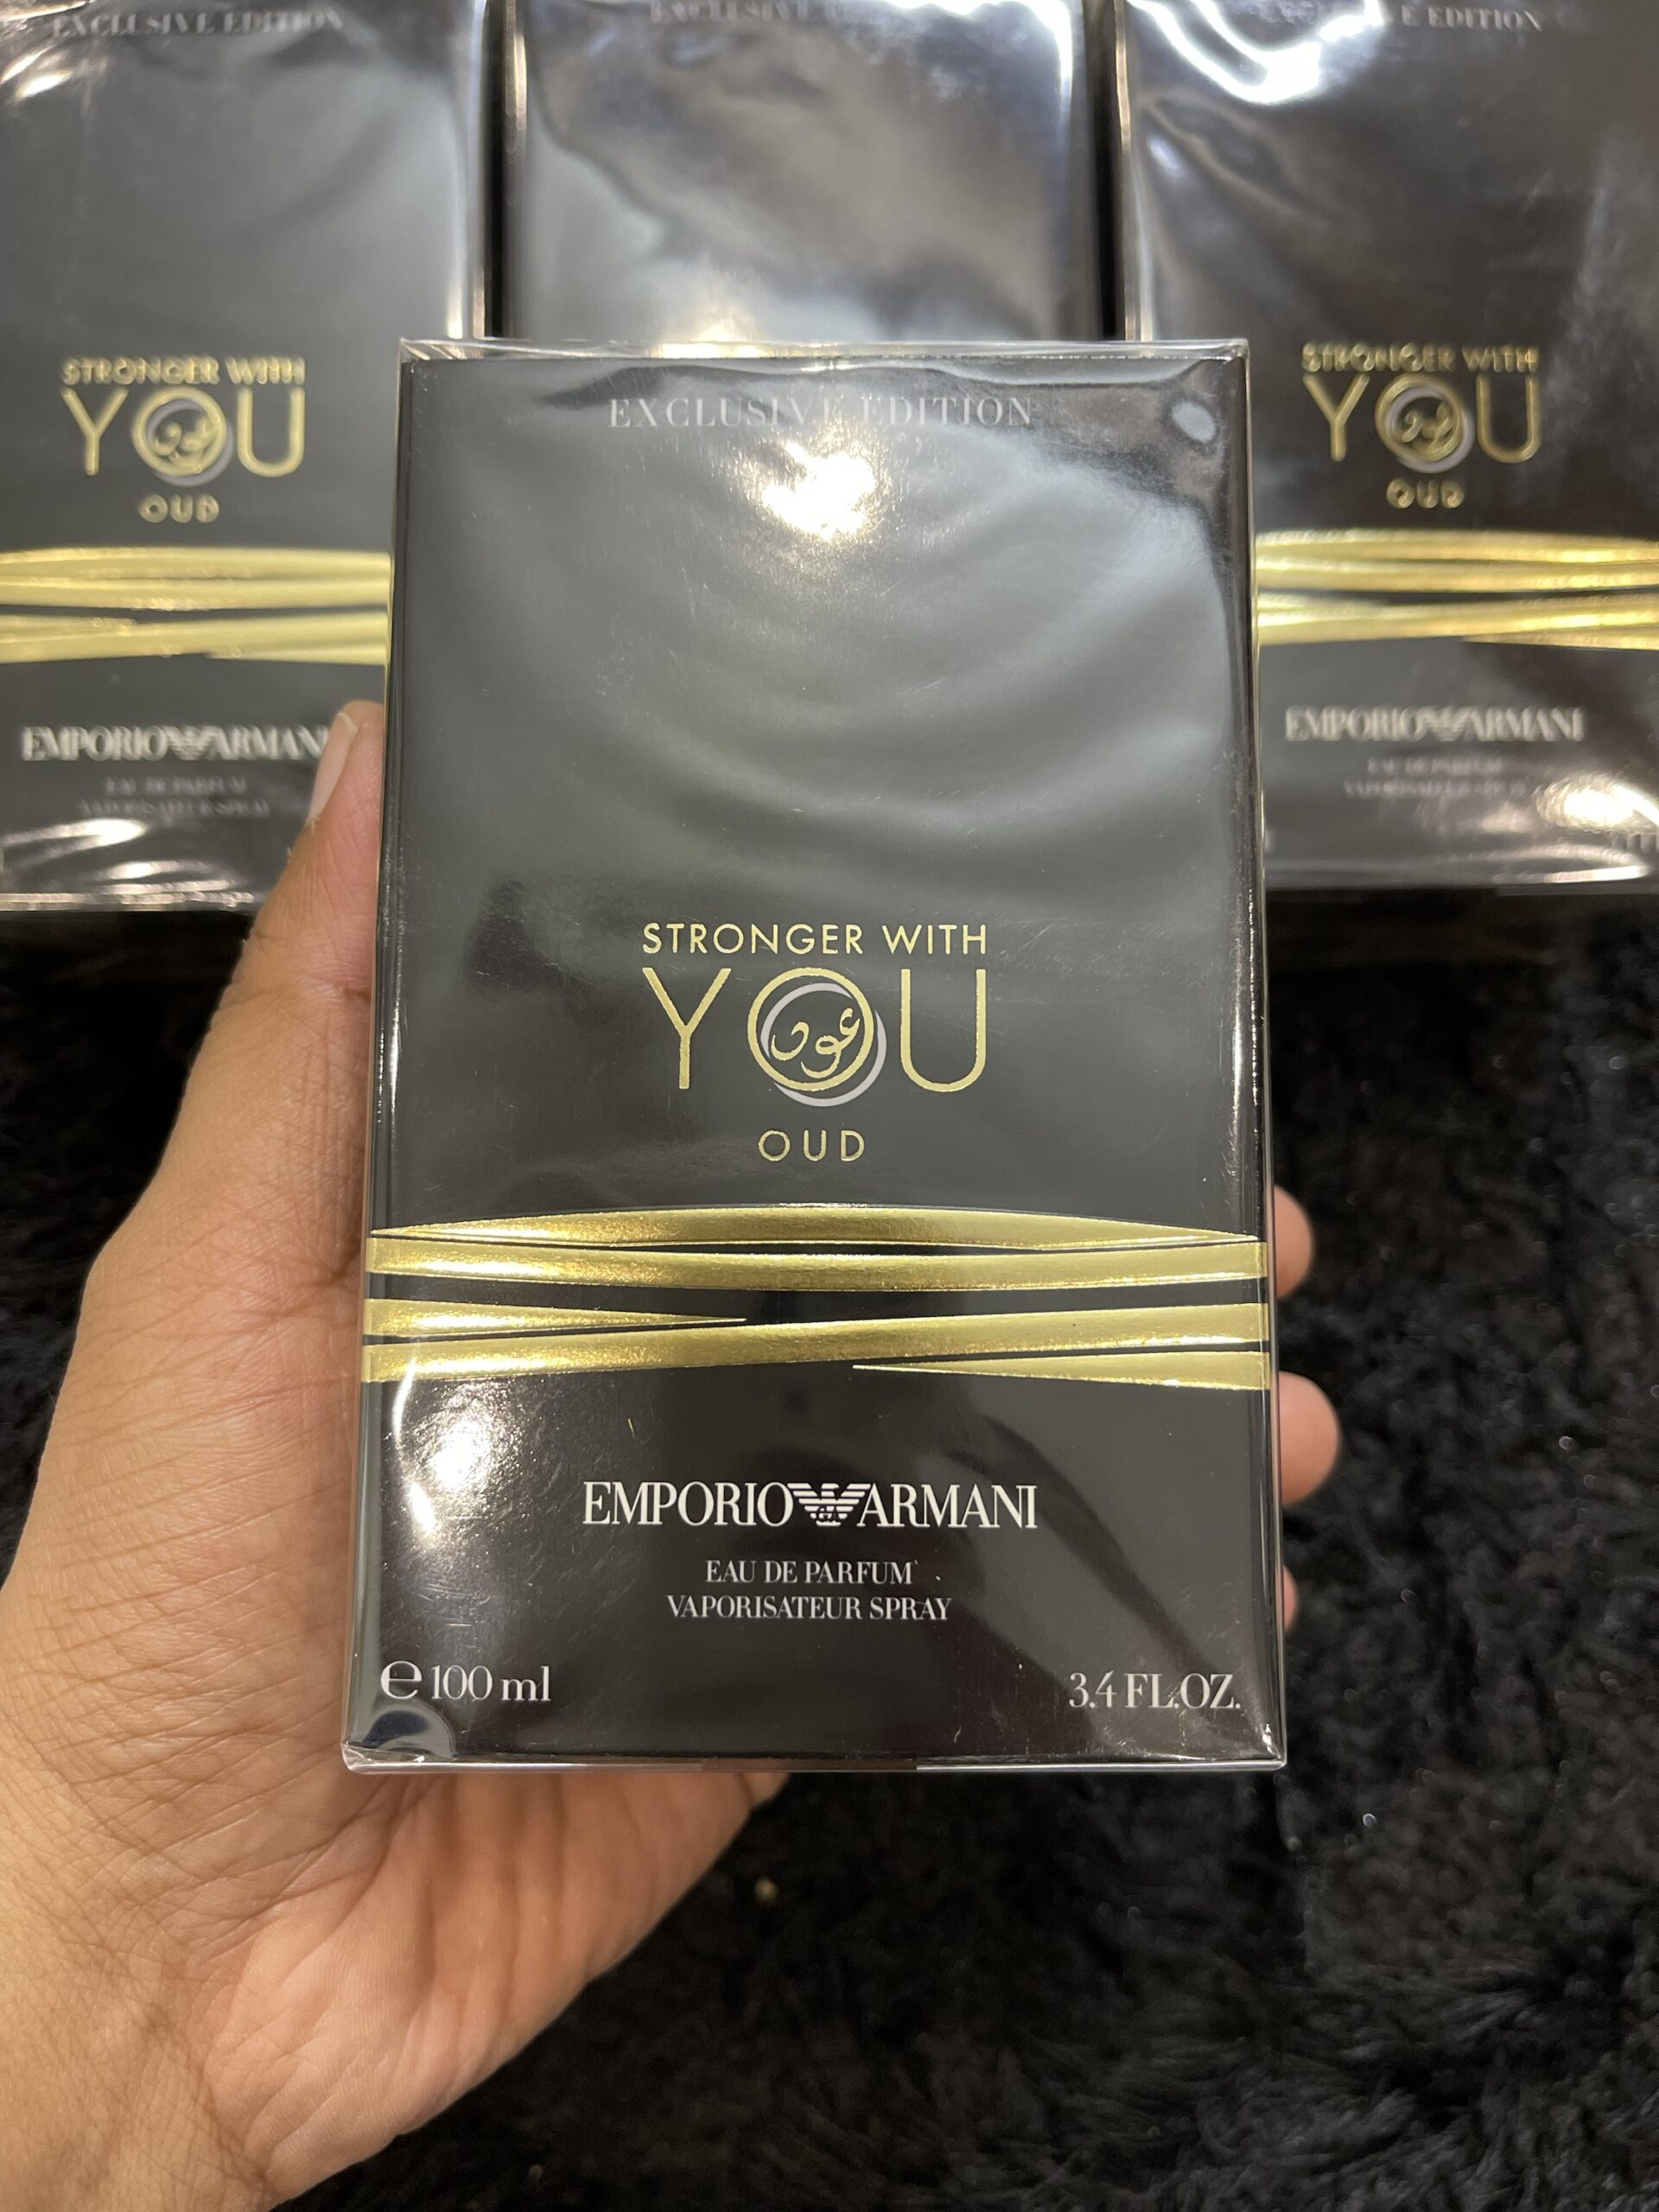 Stronger With You OUD by Emporio Armani 100ml EDP Spray 